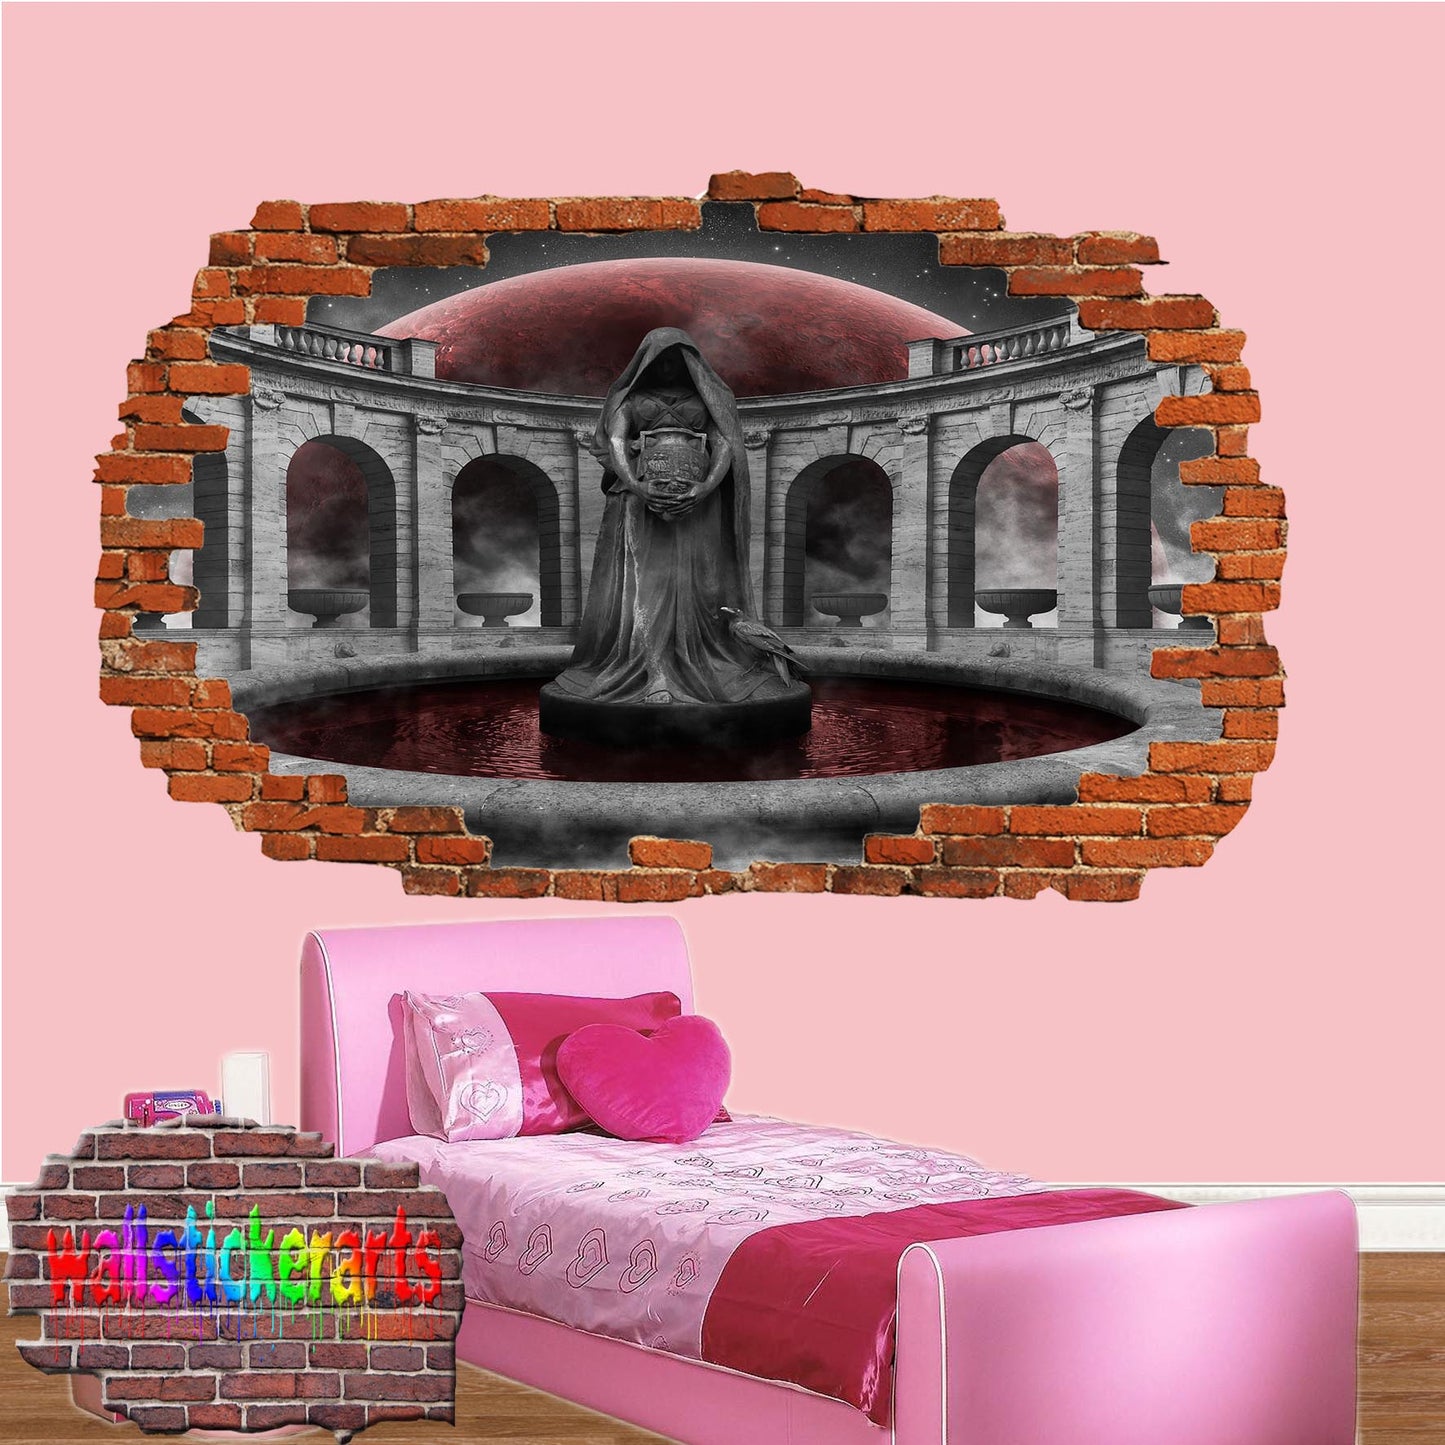 Gothic Fantasy Red Planet 3d Smashed Wall Sticker Room Decoration Decal Mural